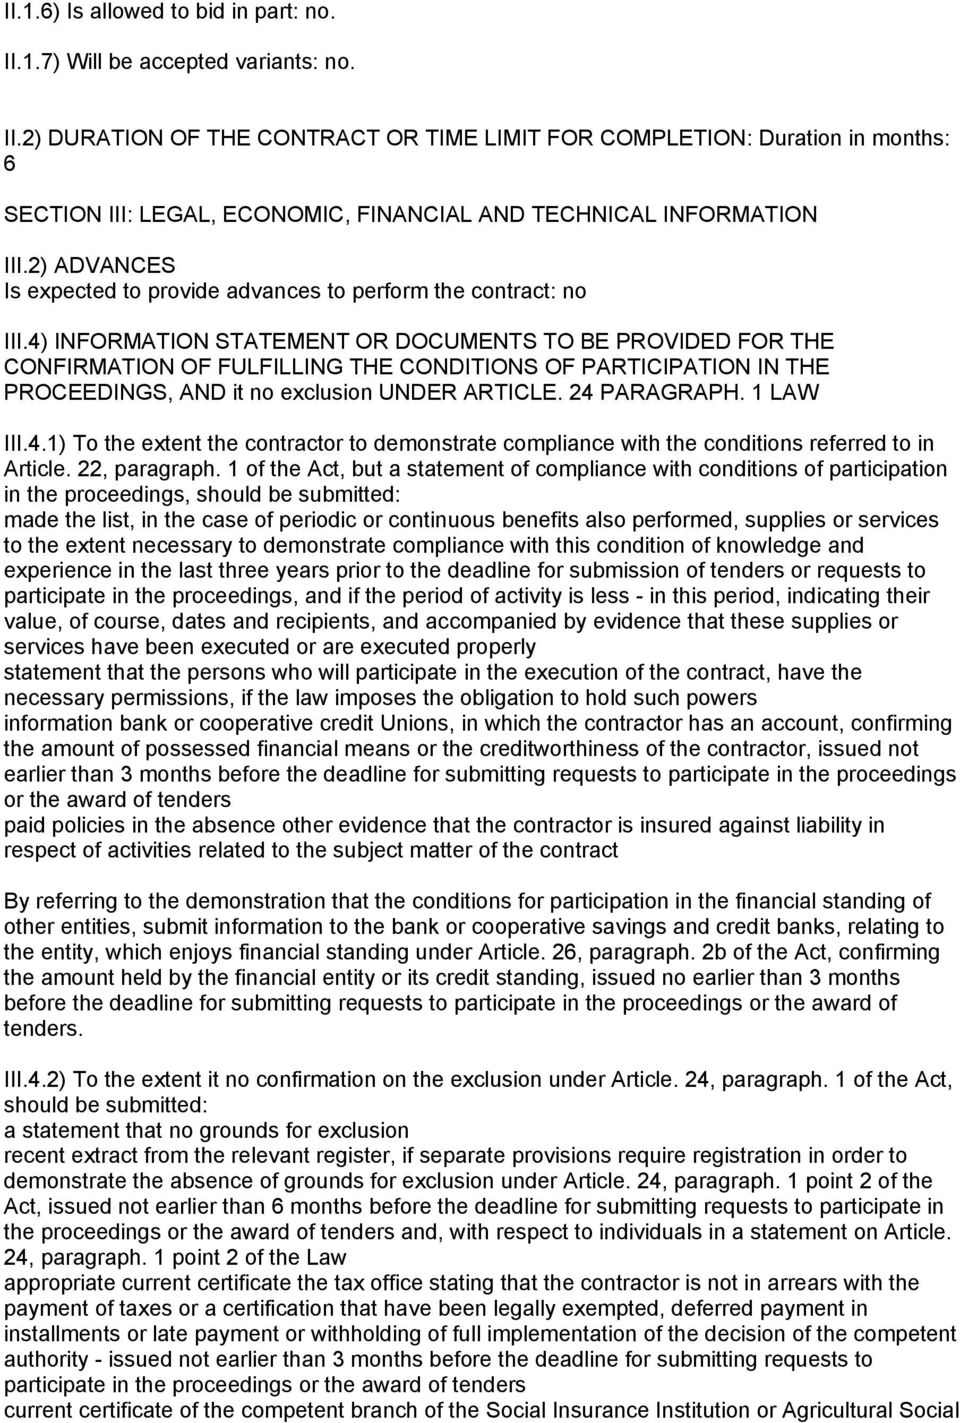 4) INFORMATION STATEMENT OR DOCUMENTS TO BE PROVIDED FOR THE CONFIRMATION OF FULFILLING THE CONDITIONS OF PARTICIPATION IN THE PROCEEDINGS, AND it no exclusion UNDER ARTICLE. 24 PARAGRAPH. 1 LAW III.